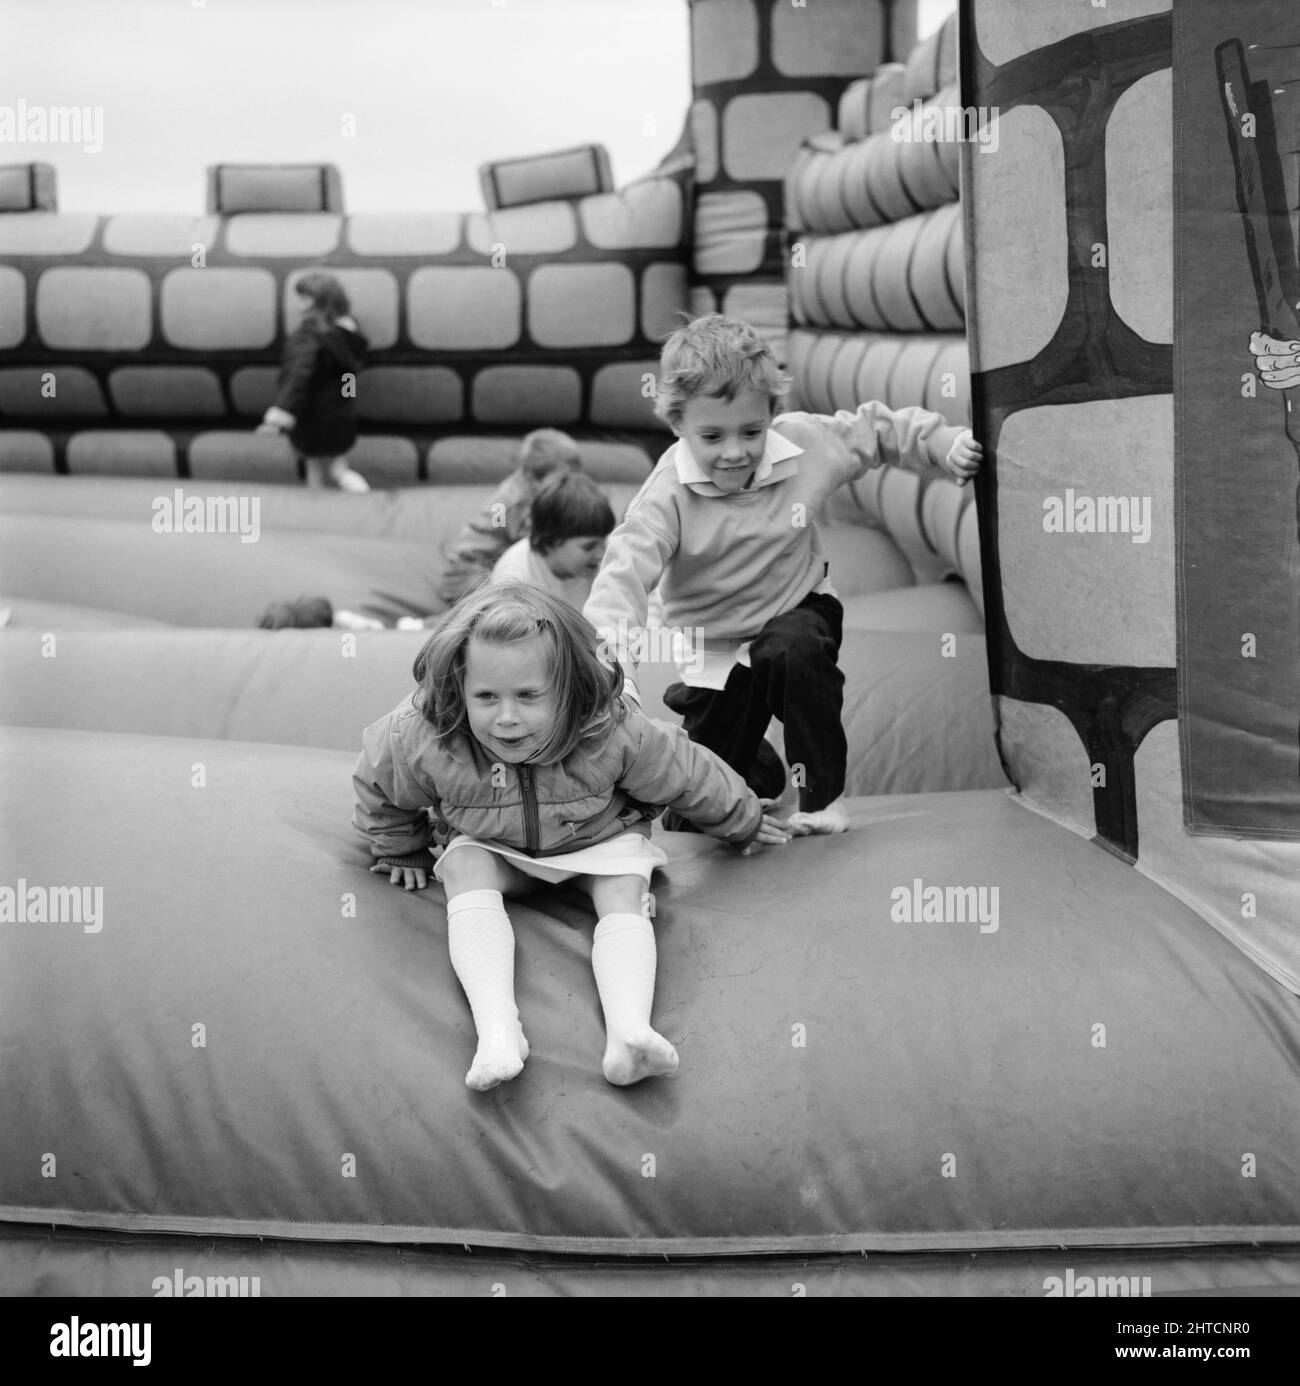 Laing Sports Ground, Rowley Lane, Elstree, Barnet, London, 11/06/1988. Children playing on the bouncy castle at the 1988 Family Day at Laing's Sports Ground. Attractions at that year's Family Day included; a parade of vintage cars, helicopter rides, plate smashing, stalls, an 'It's a Knockout' style competition and tennis and six-a-side football tournaments.  The event was opened by John Conteh, former world light heavy weight champion and ended with a barbecue and disco. Stock Photo